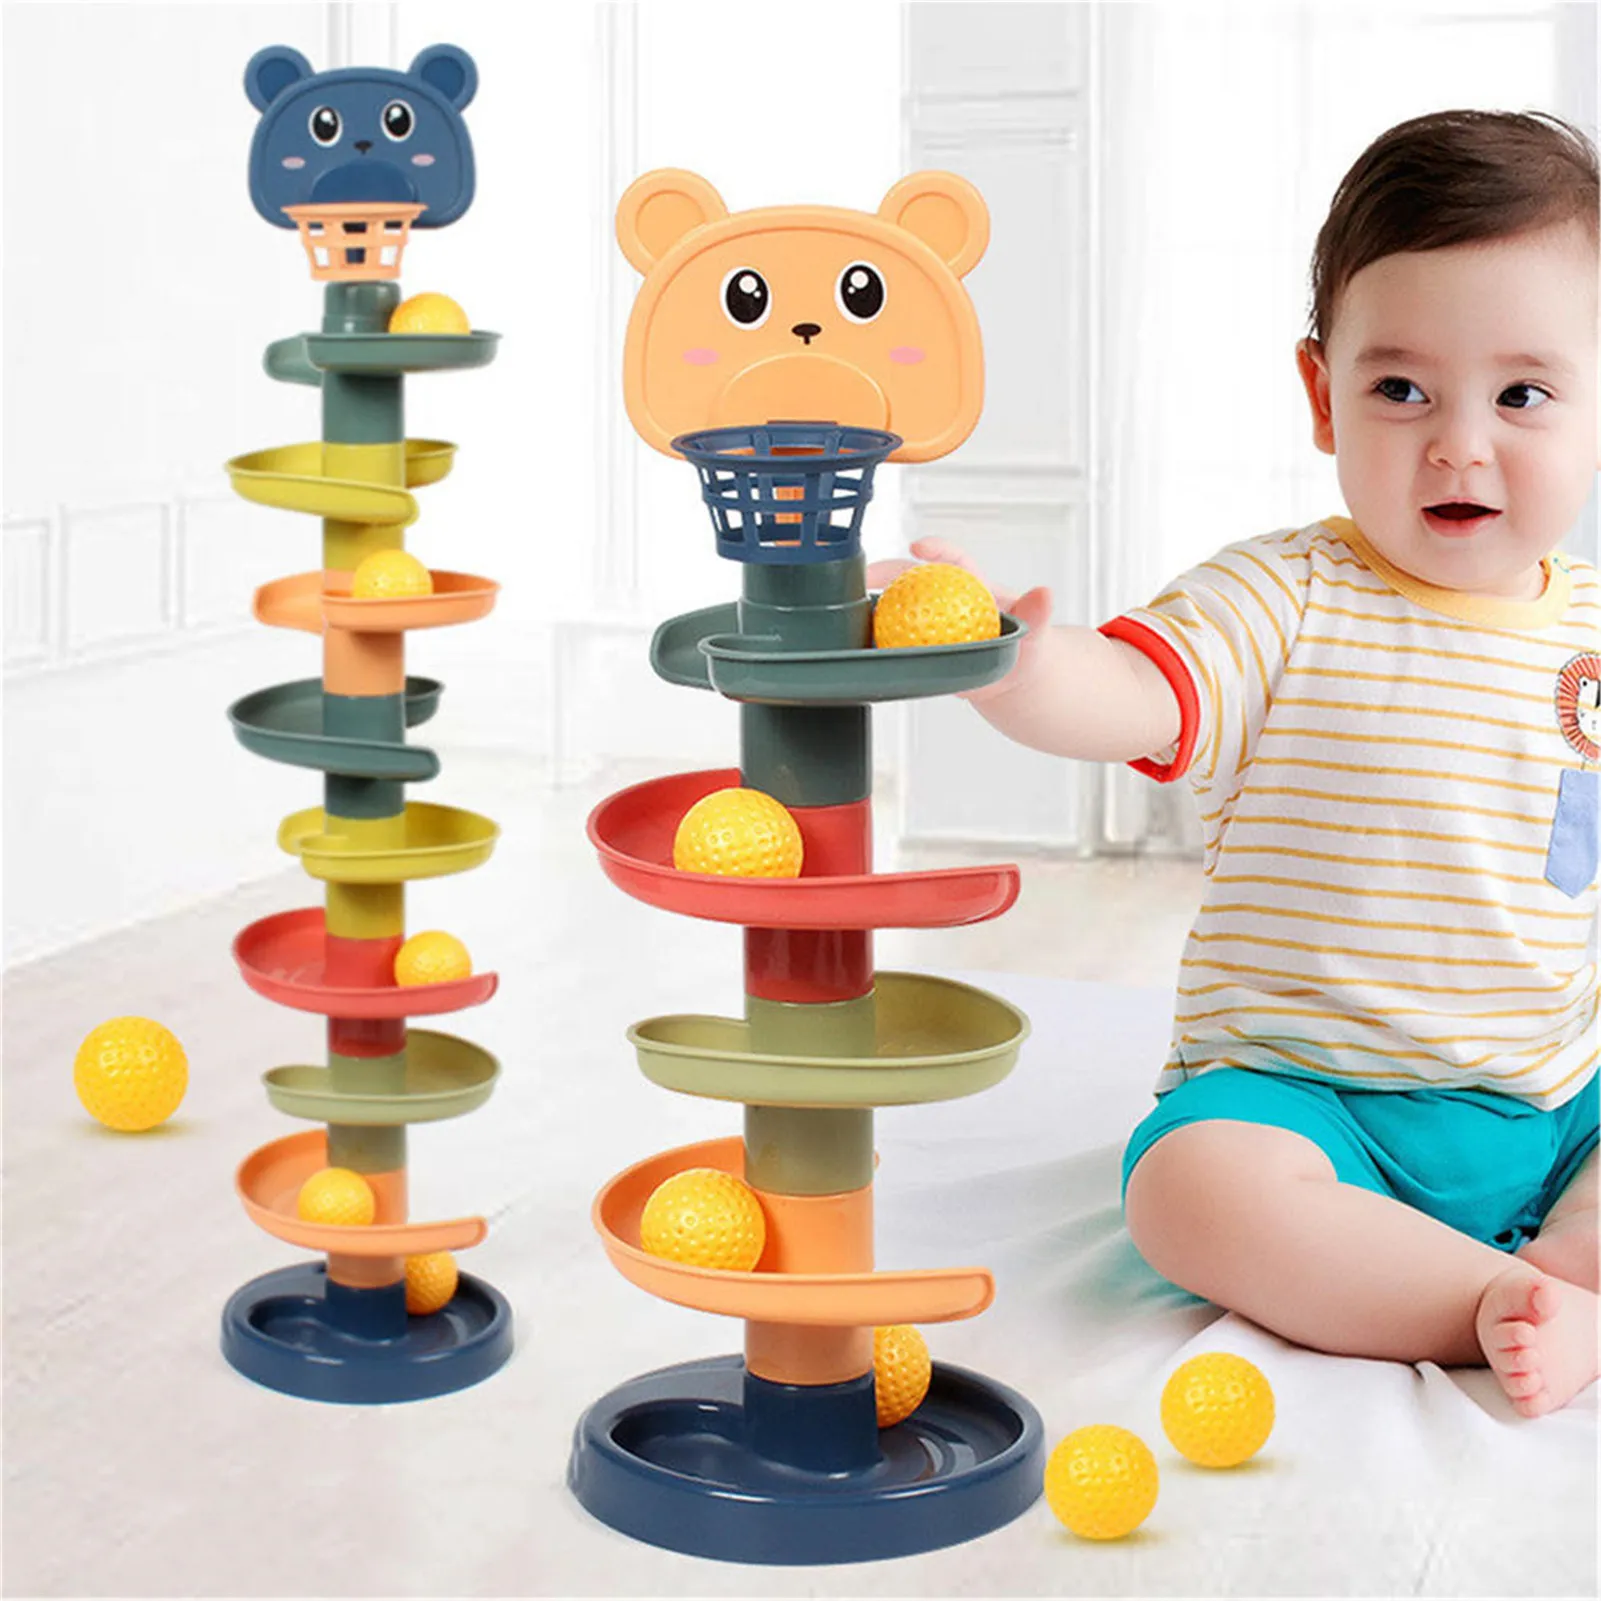 

Educations Assembled Children's Toy Rotating Rolling Ball Gliding Tower Educational Toy Rotating Track Baby Toys Gift for Kids